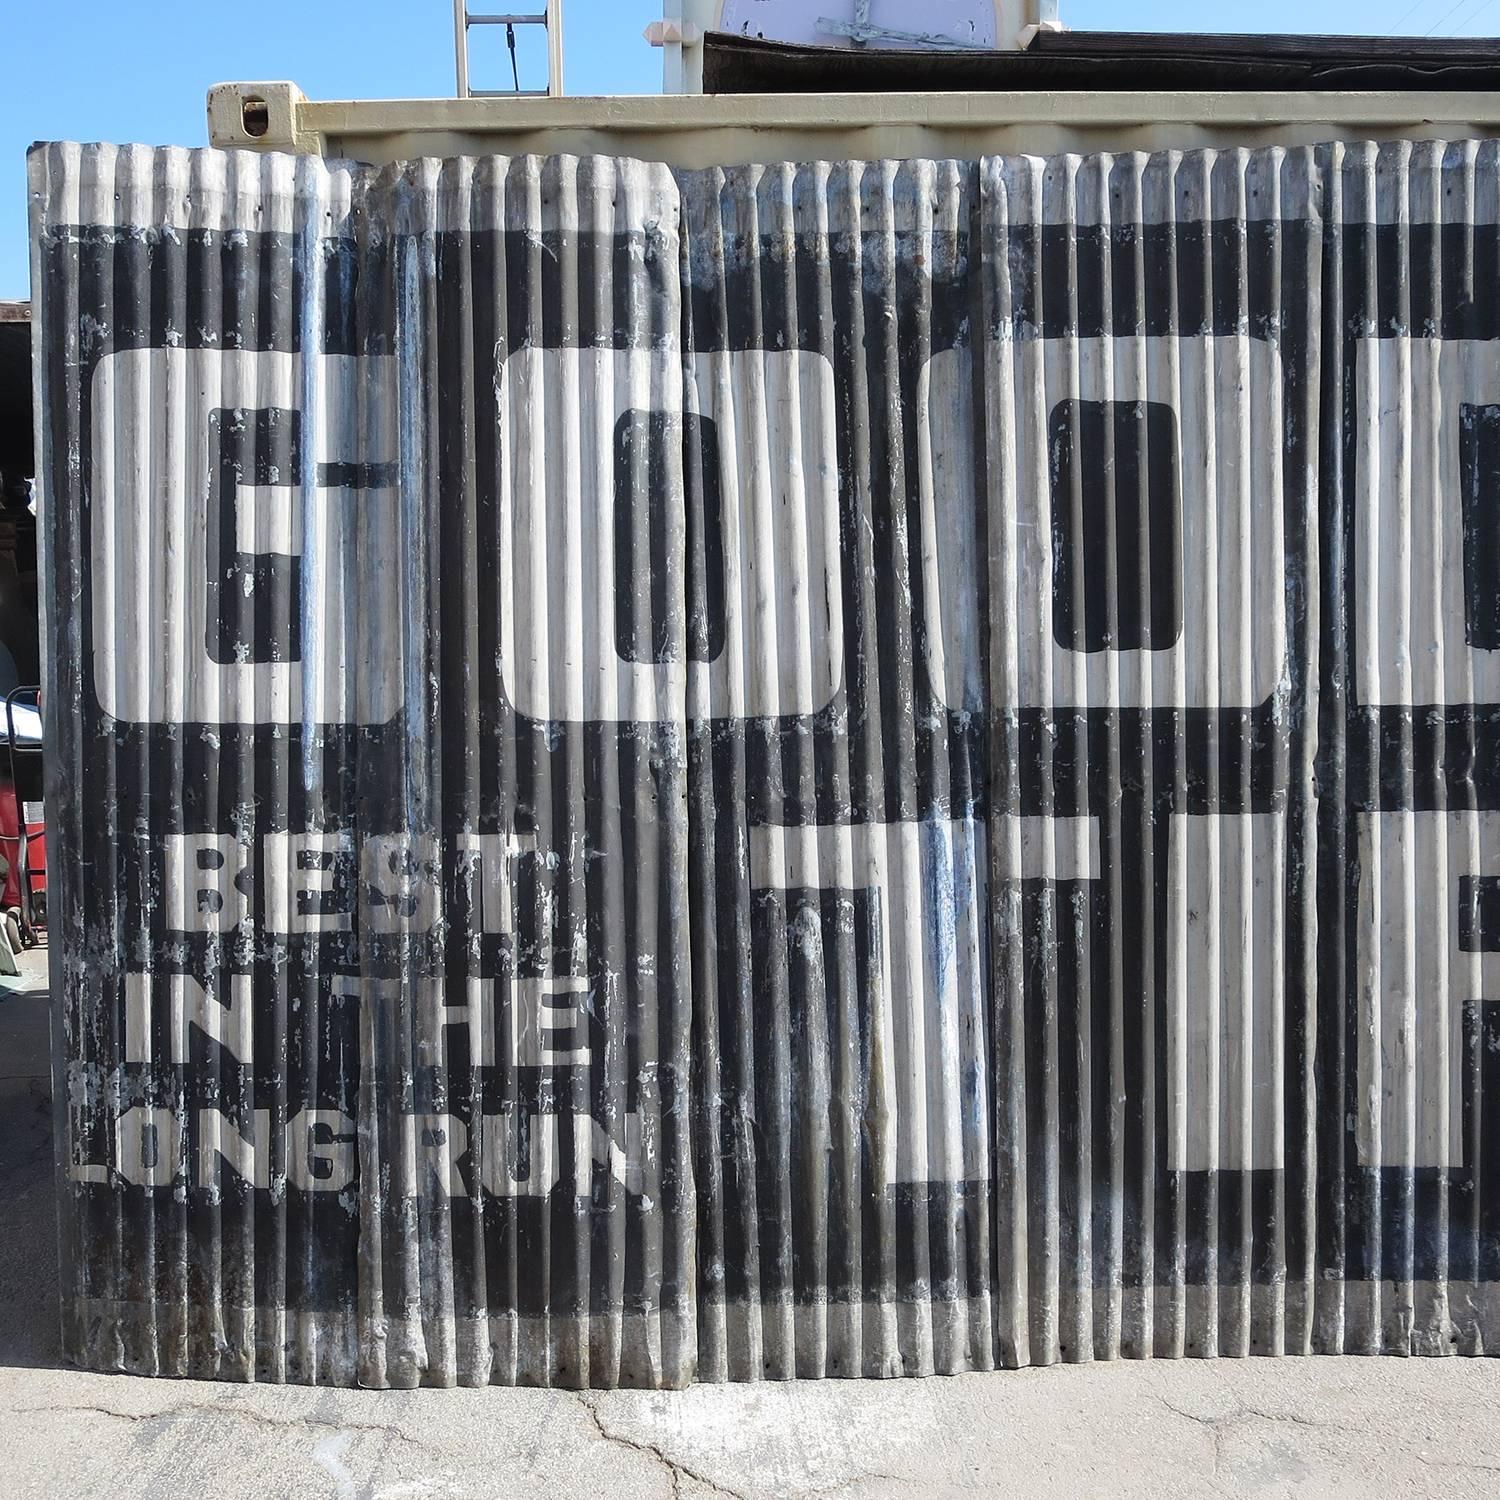 American Massive Goodrich Tires Painted Sign on Corrugated Steel Panels